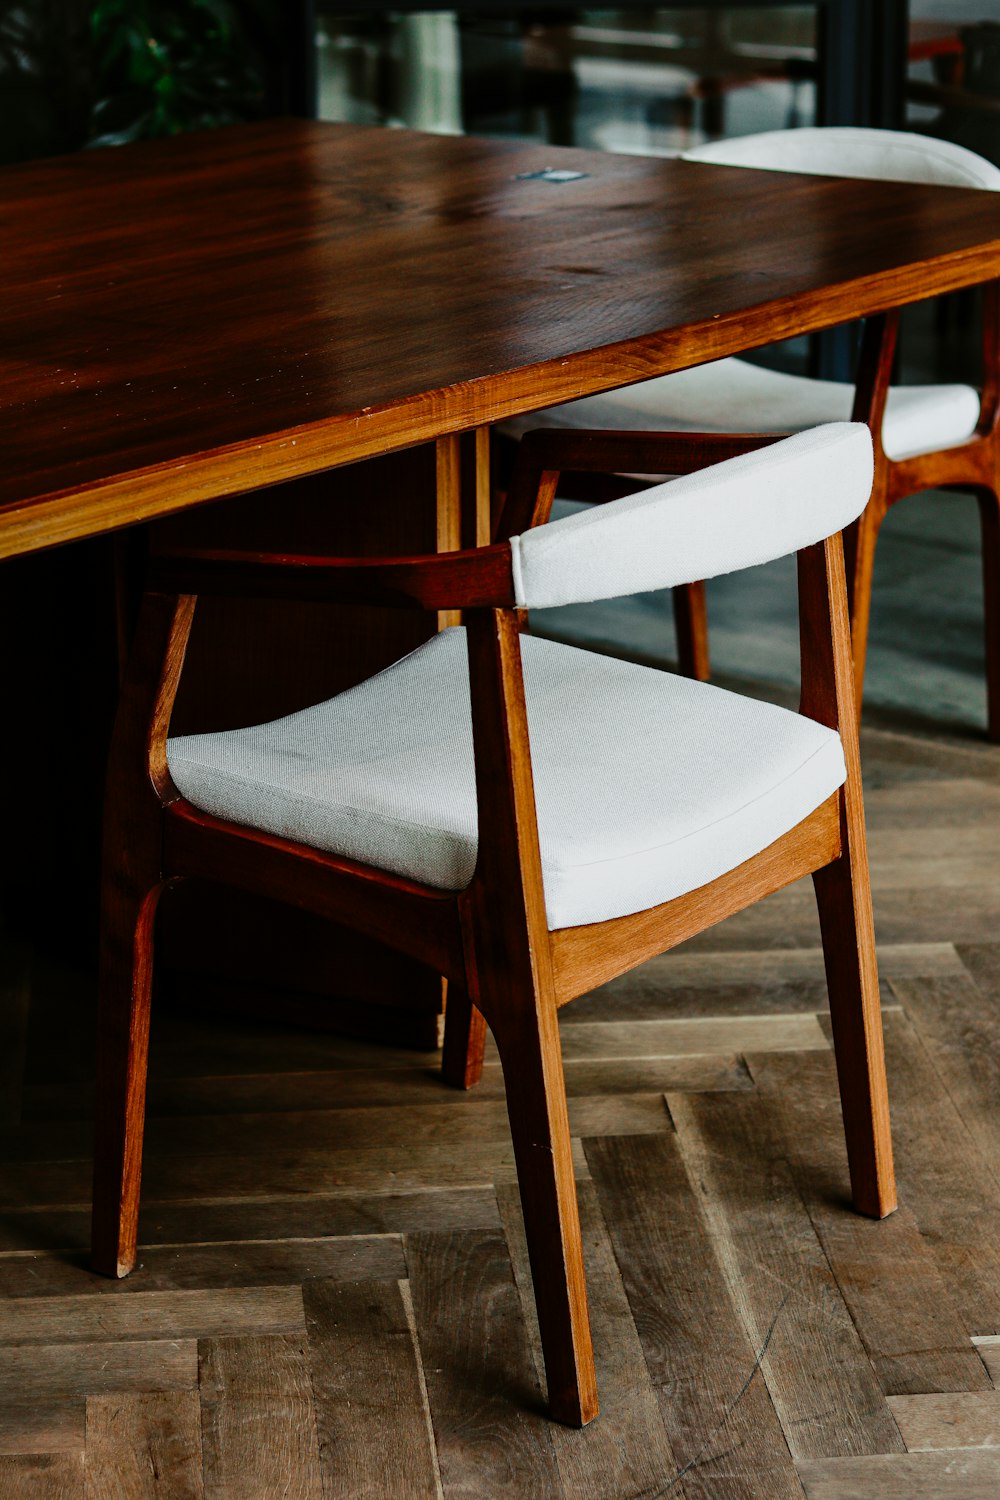 brown wooden table with white and brown chair